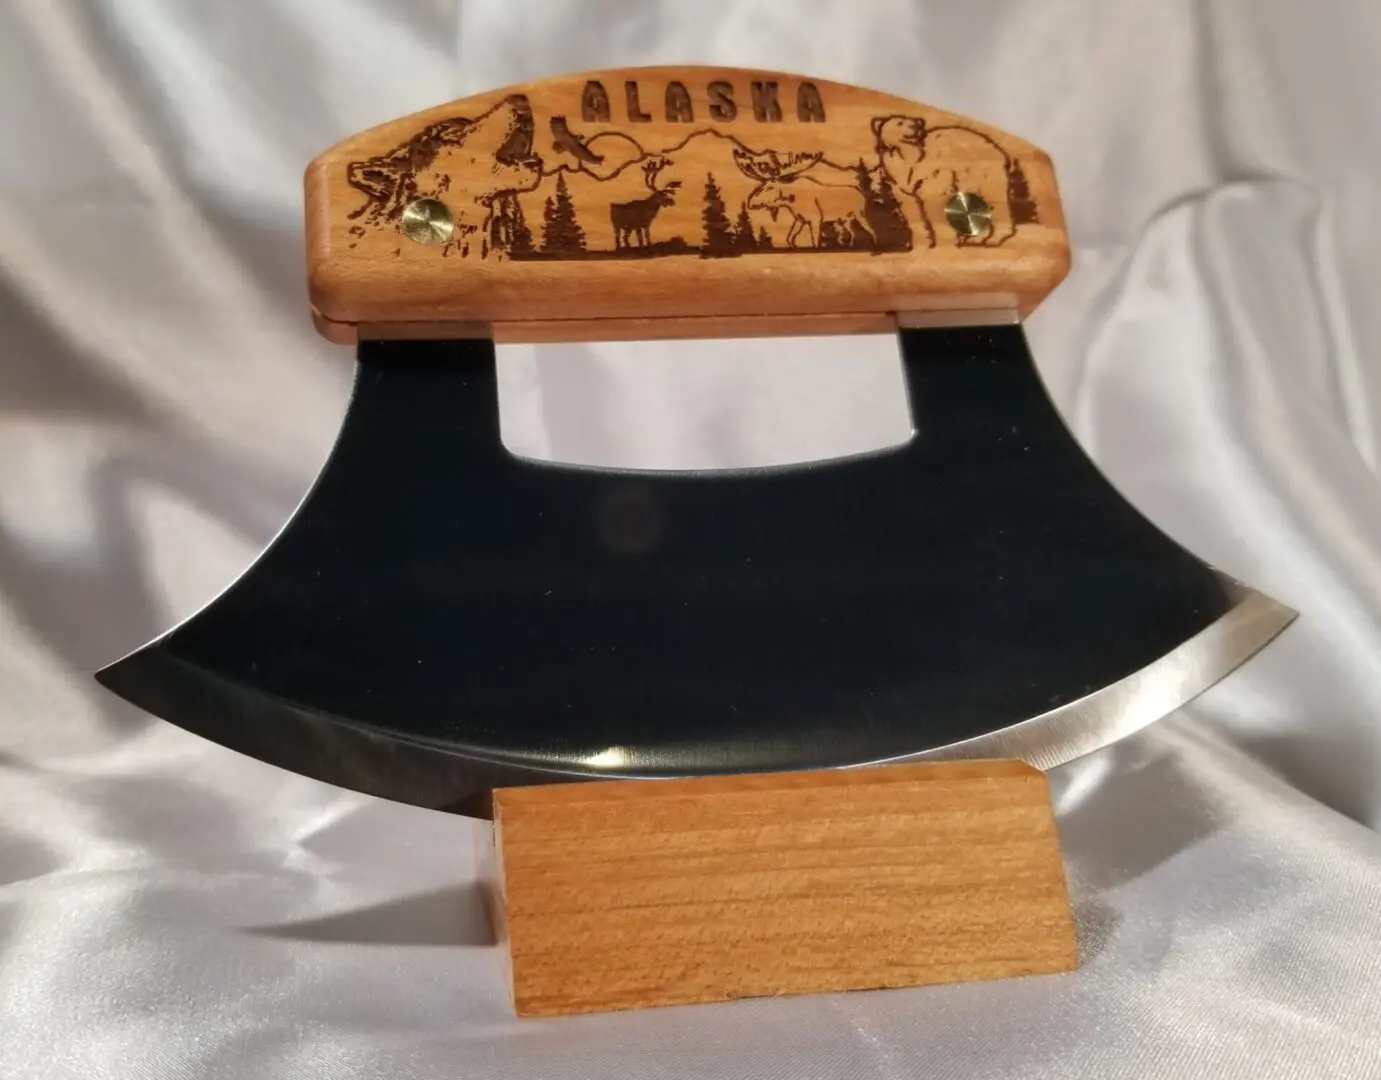 A wooden knife holder with an engraved blade.